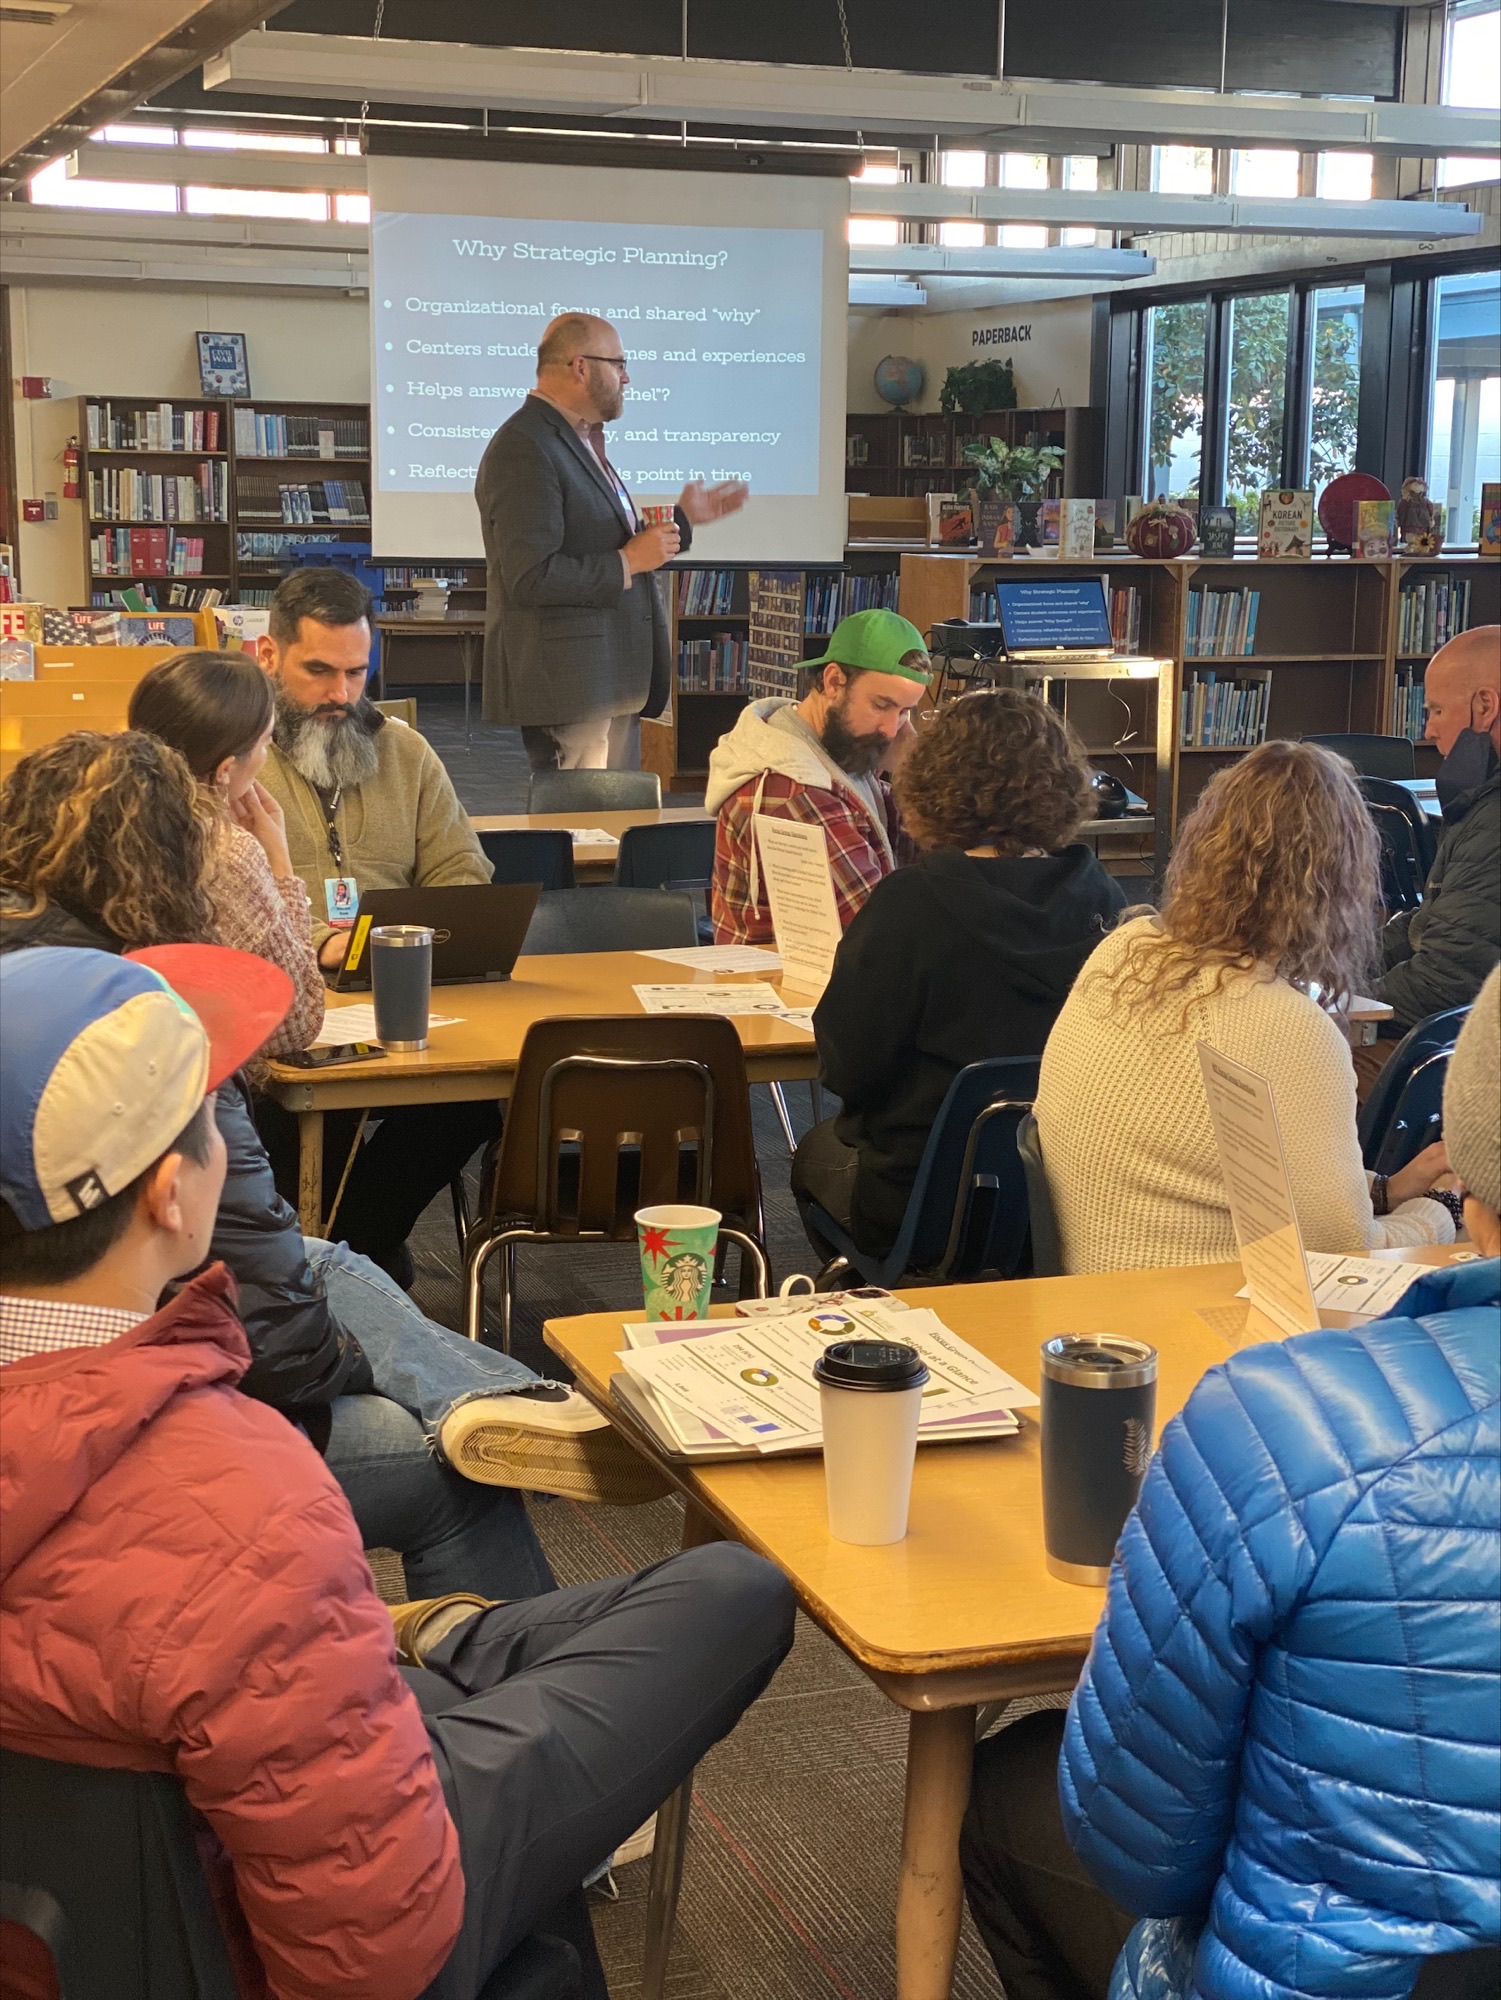 Bethel Superintendents explaining strategic visioning process to group of employees in library of Shasta Middle School. 